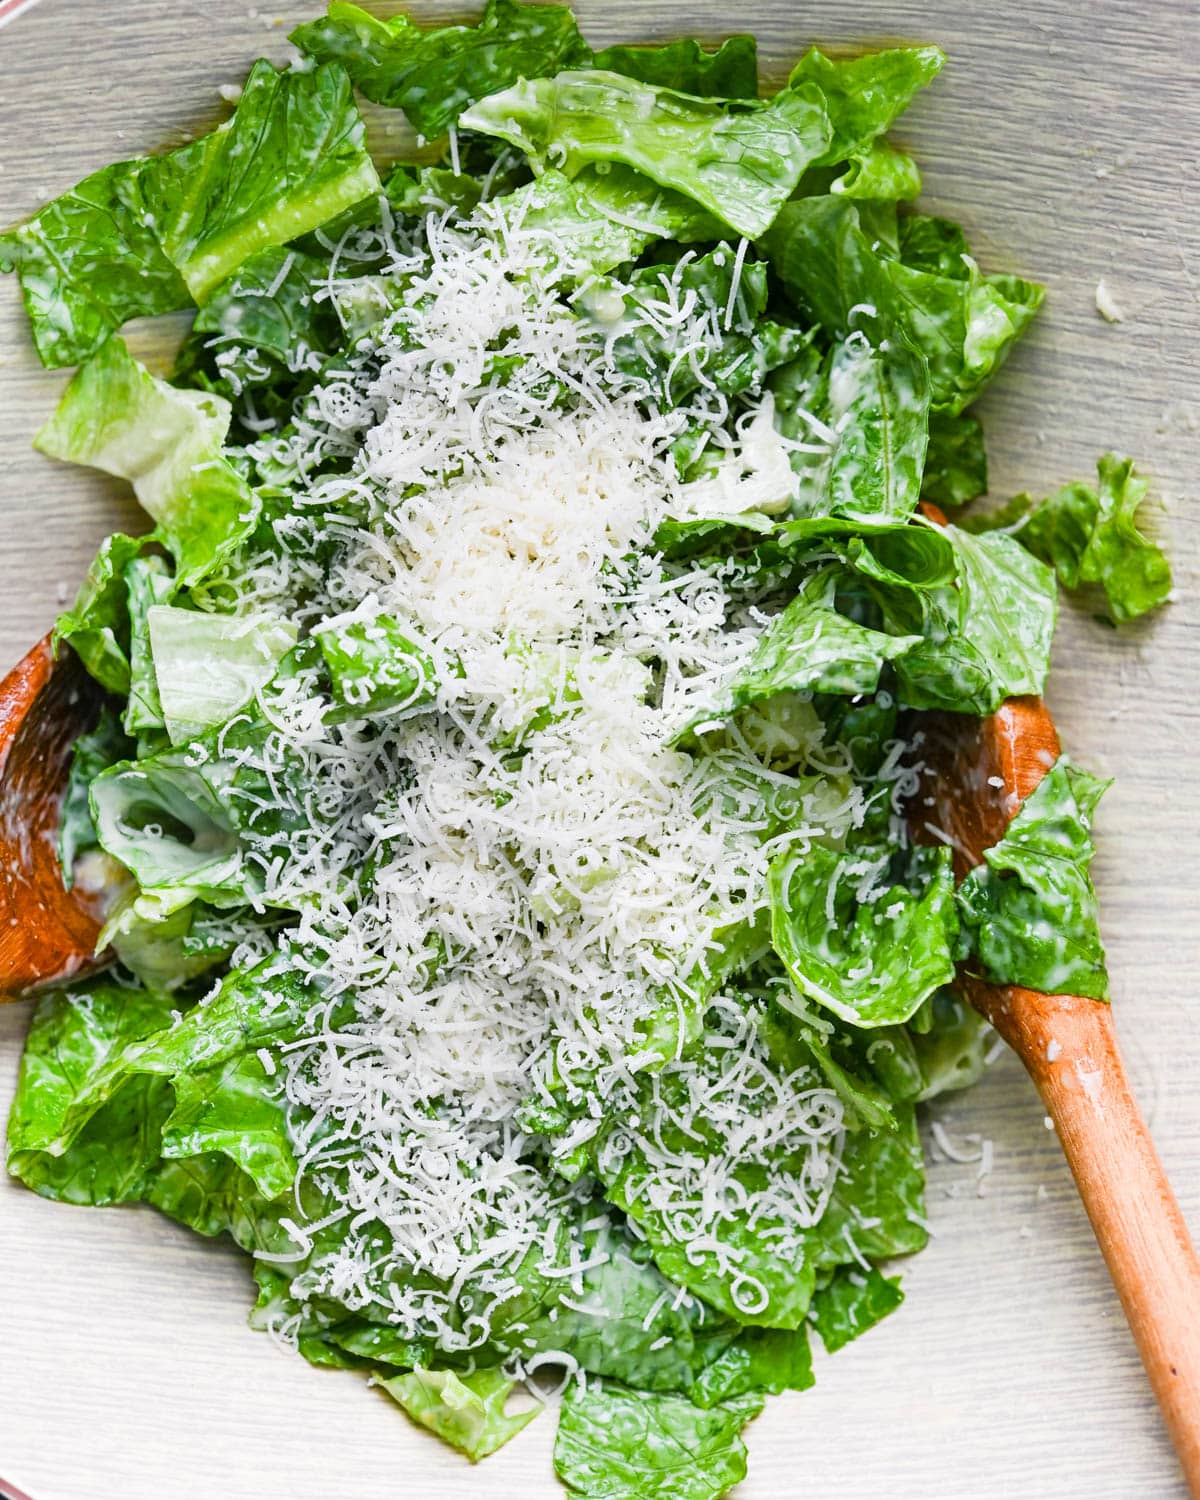 I am mixing the romaine lettuce with salad dressing and extra parmesan cheese. 